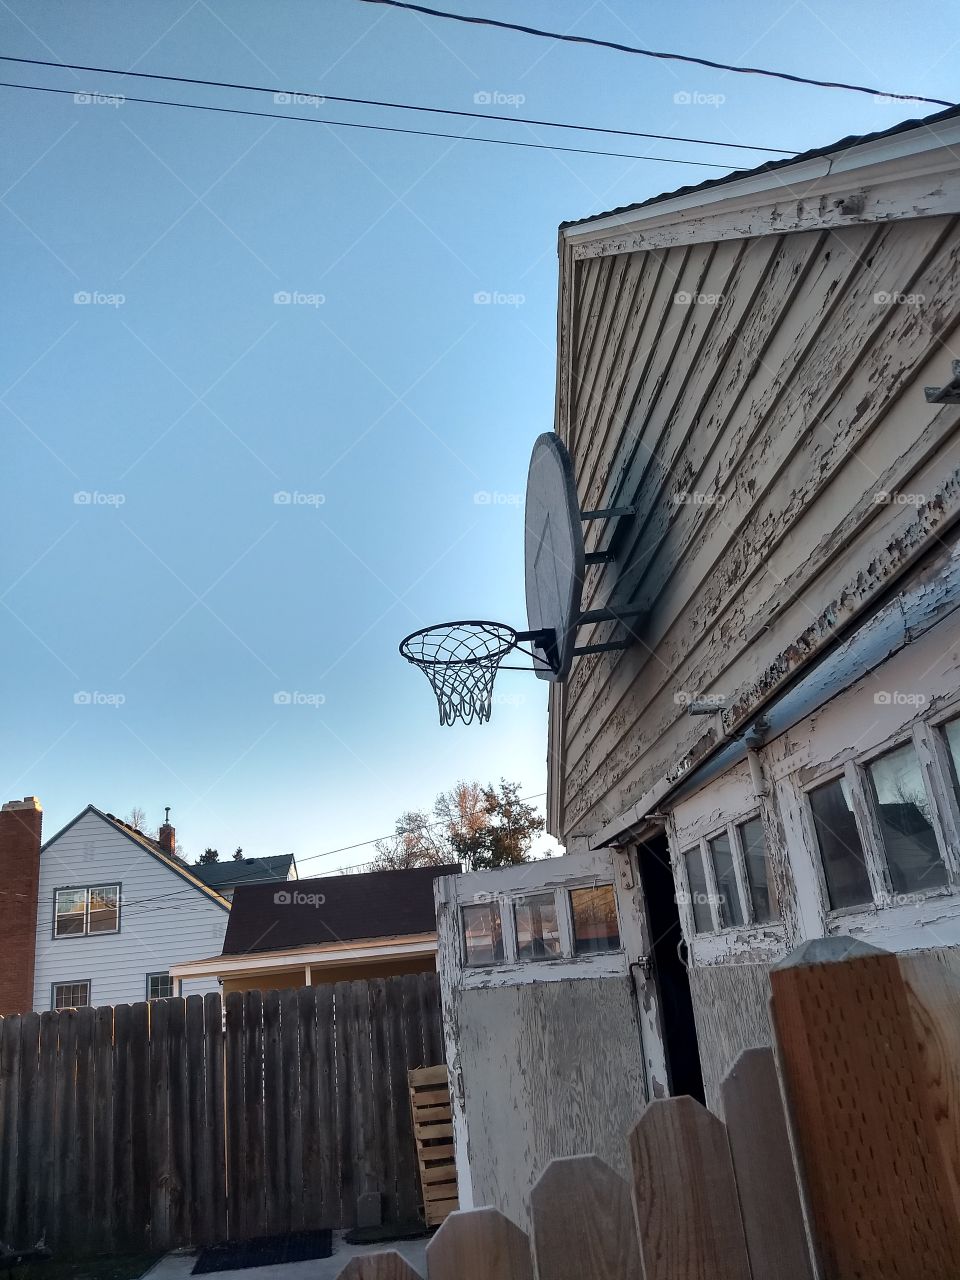 Basketball Hoop Doing Its Thing